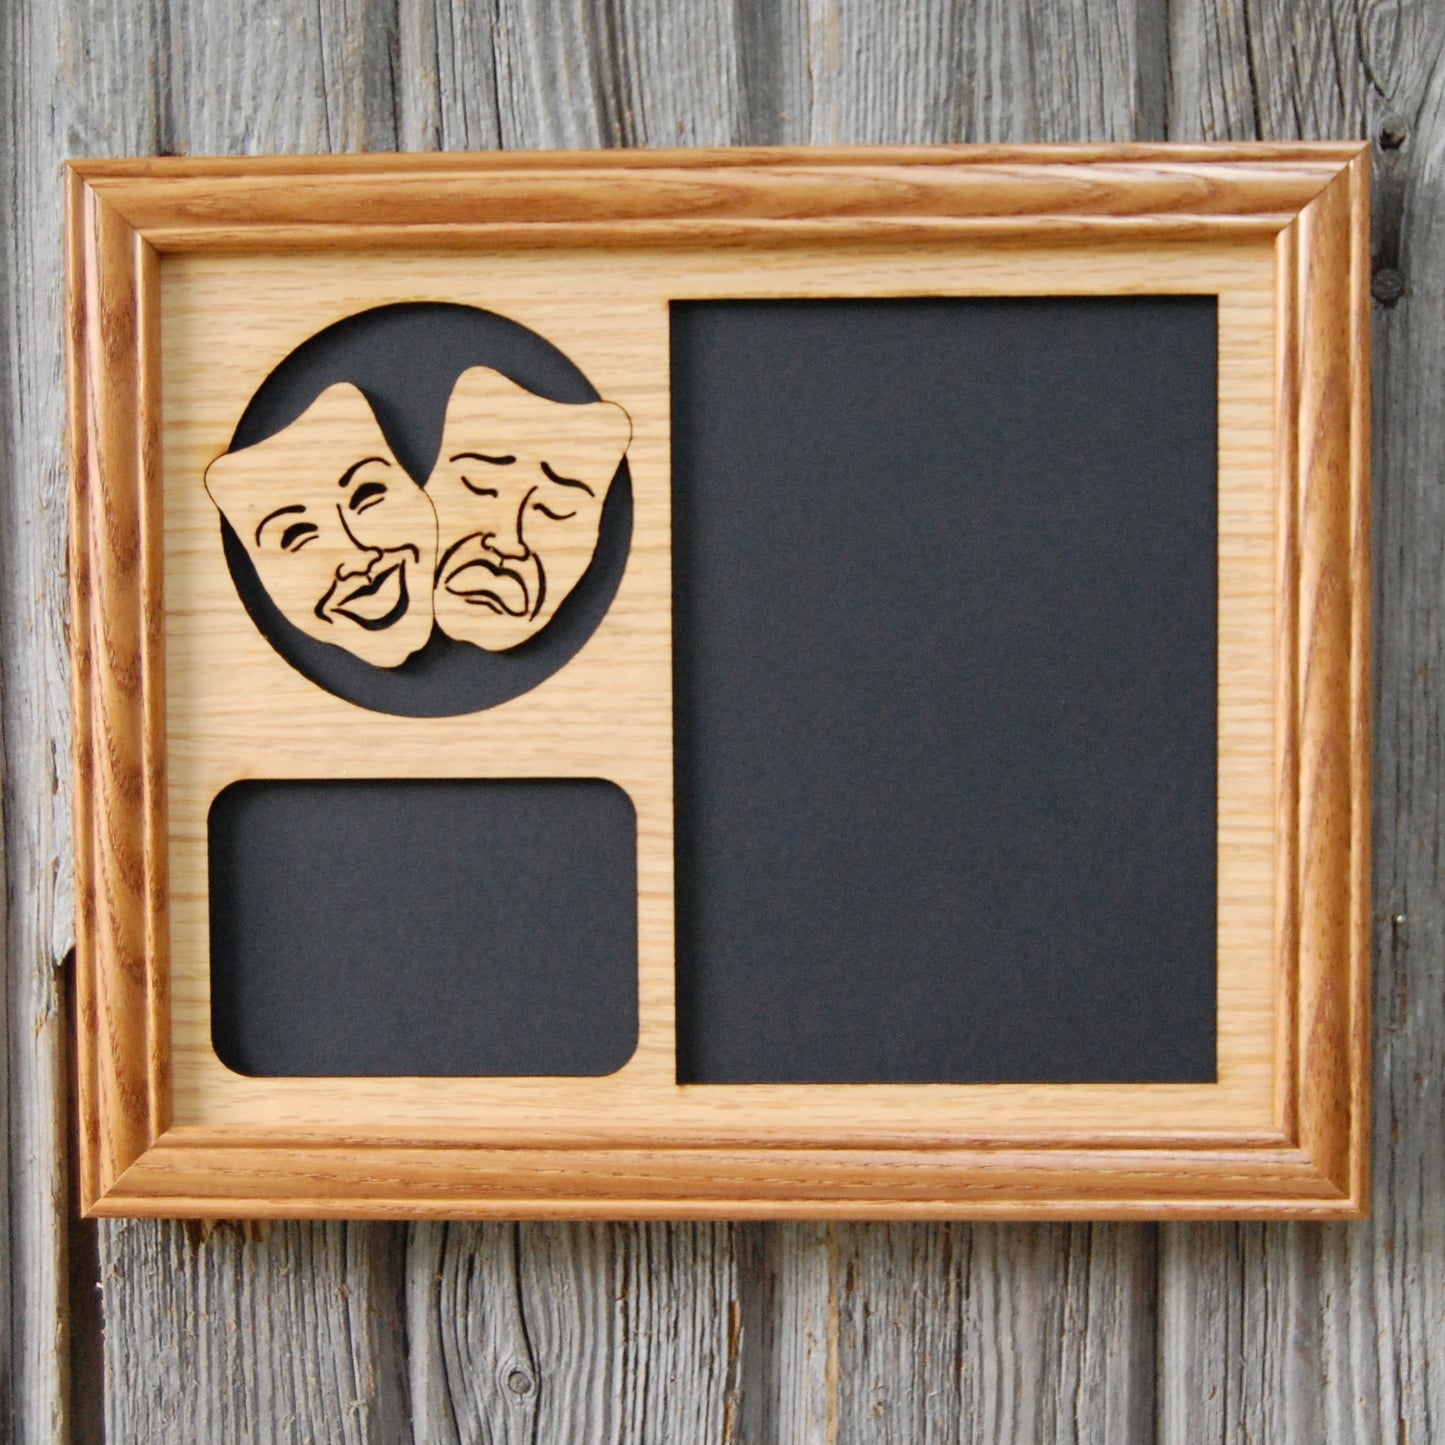 Theater Picture Frame - 8x10 Frame Hold 5x7 and 3x4 Photos